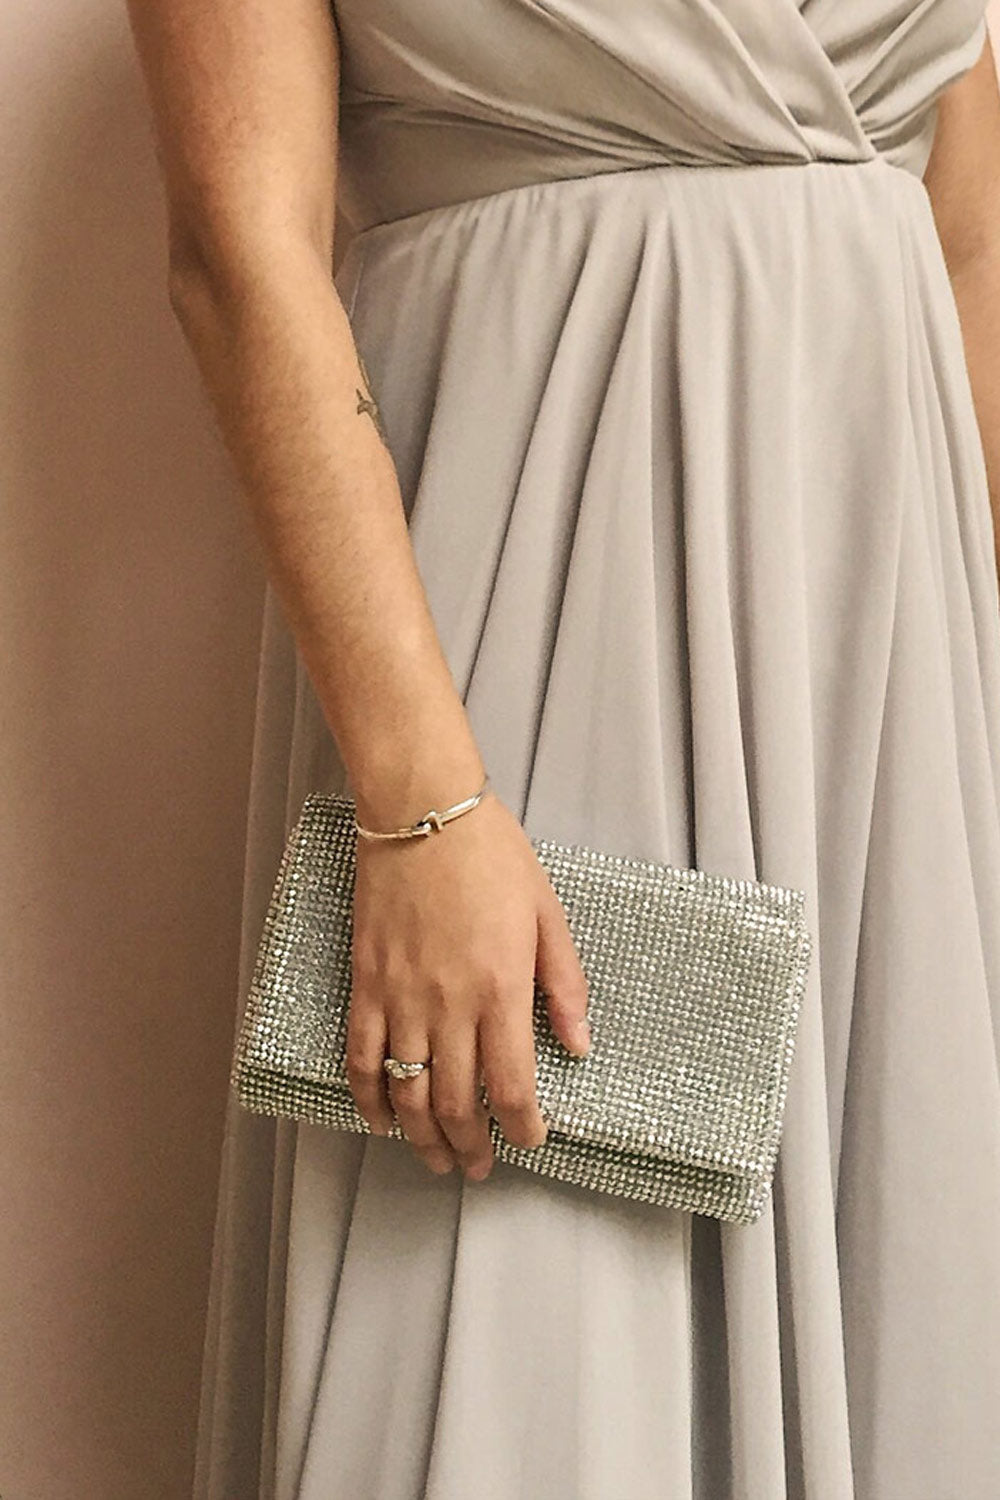 Agave Silver Crystal Clutch | Boutique 1861 on model 2